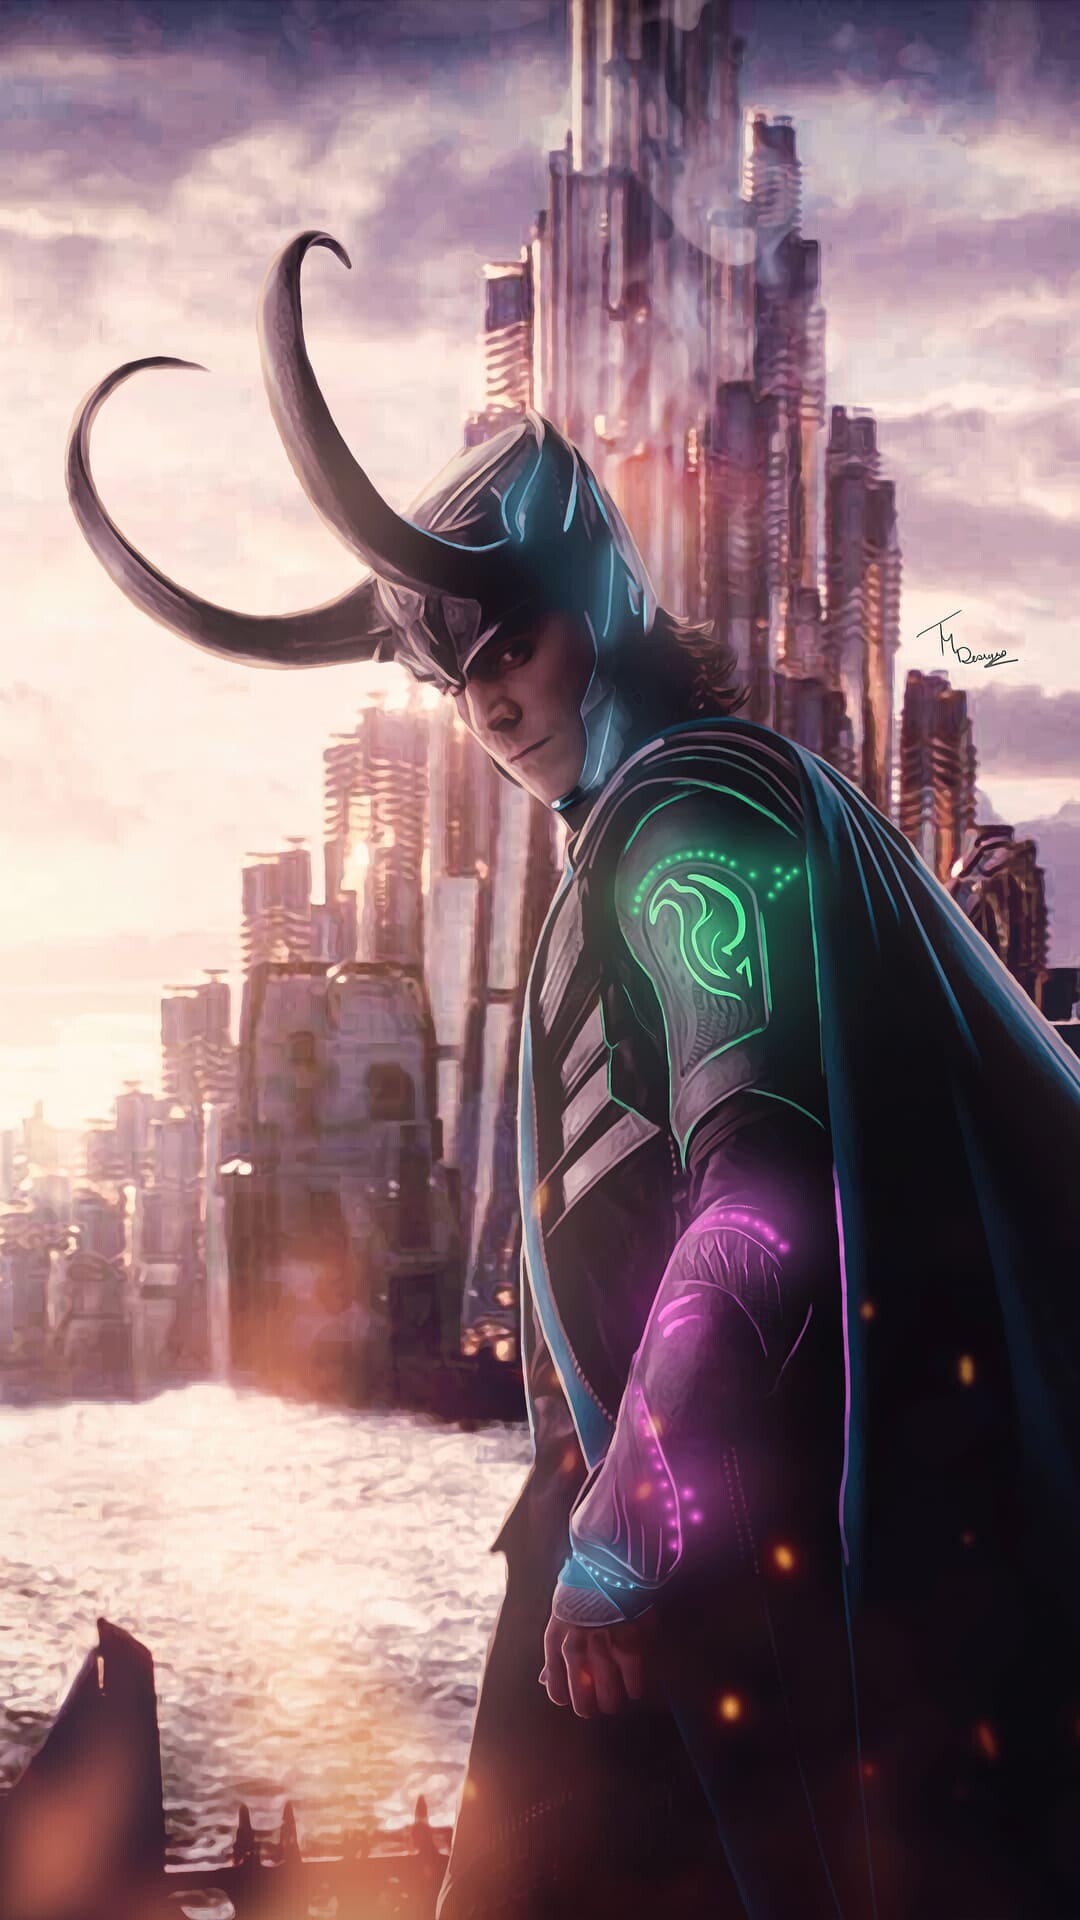 Loki (TV Series): God Of Mischief, The biological son of Laufey, King of the Frost Giants. 1080x1920 Full HD Wallpaper.